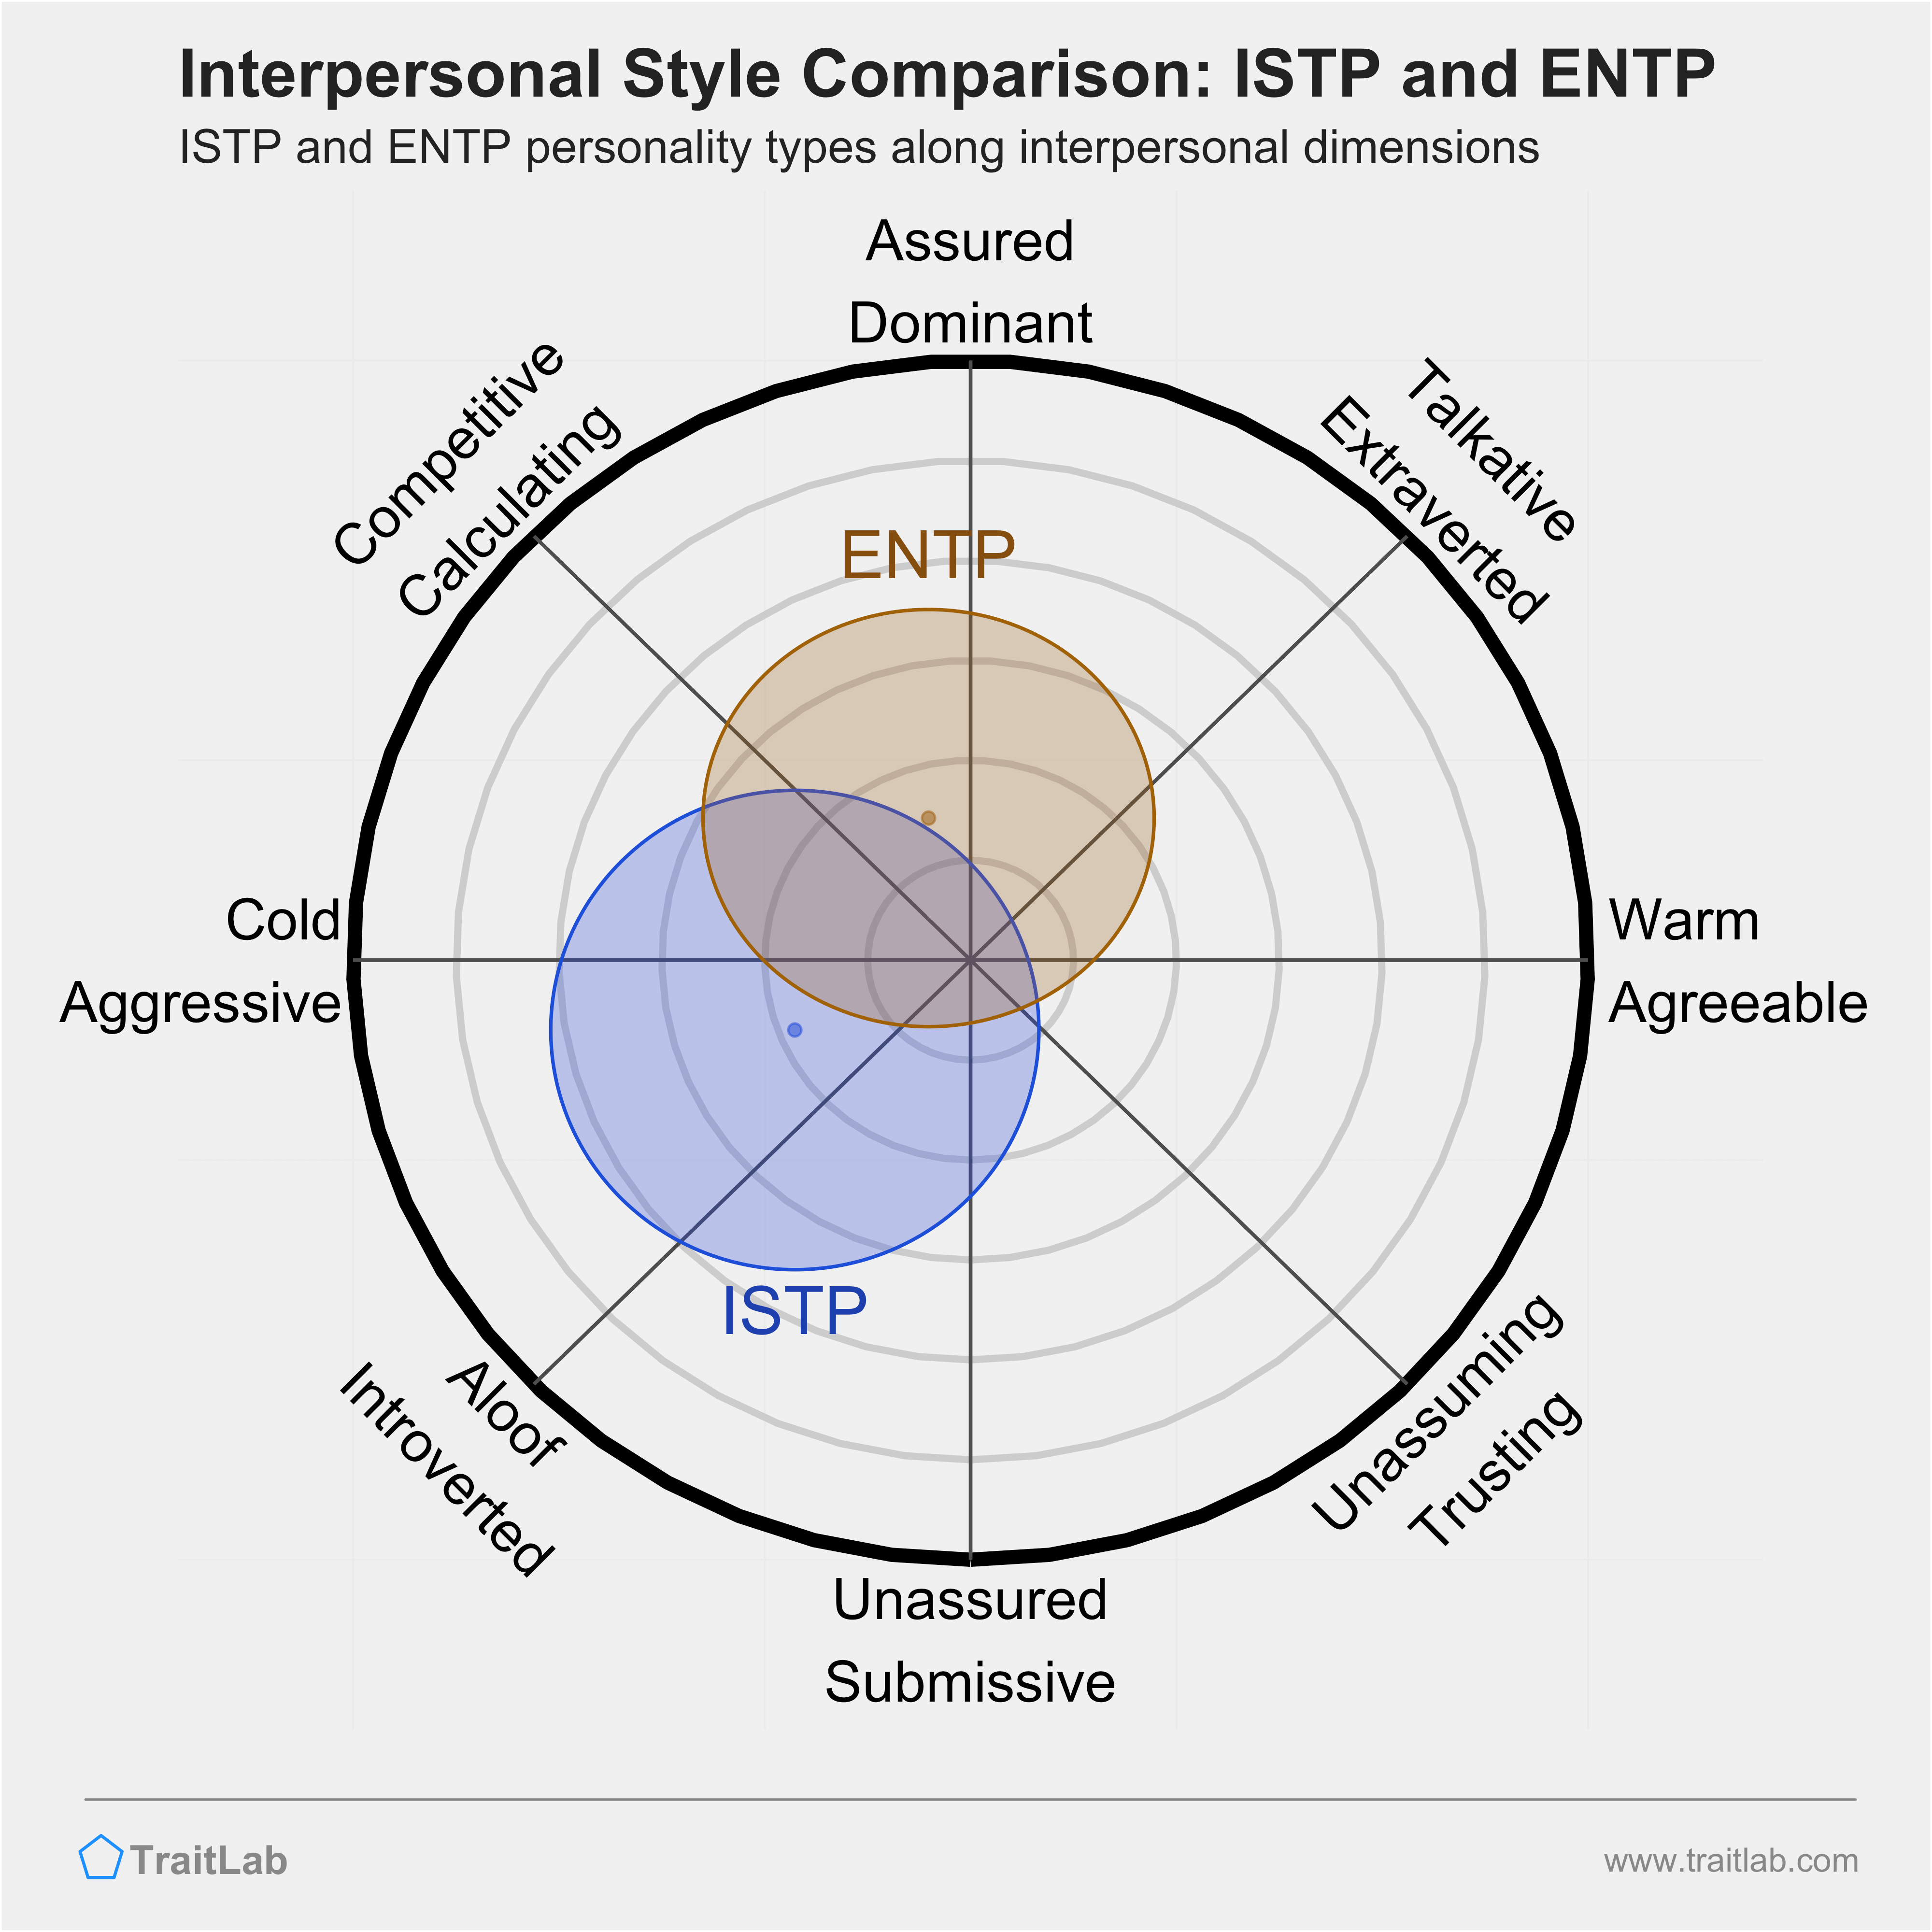 ISTP and ENTP comparison across interpersonal dimensions